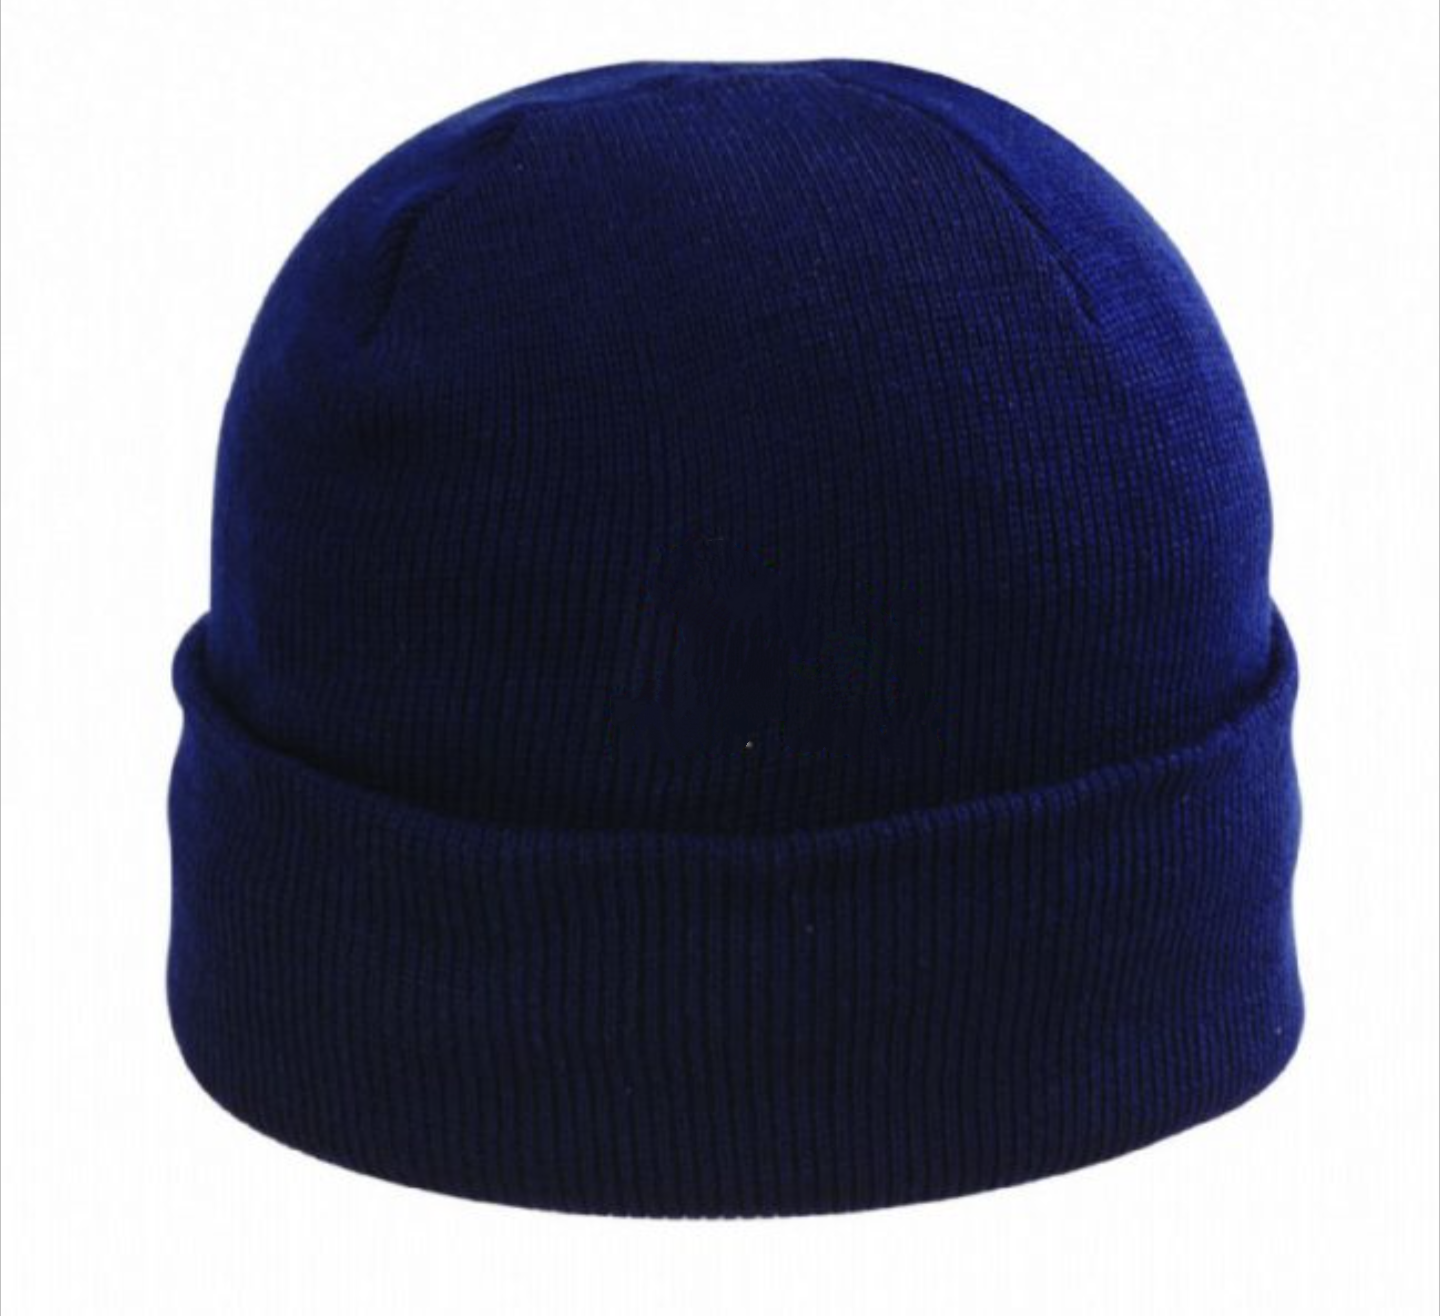 CURVED KNIT HAT-12"